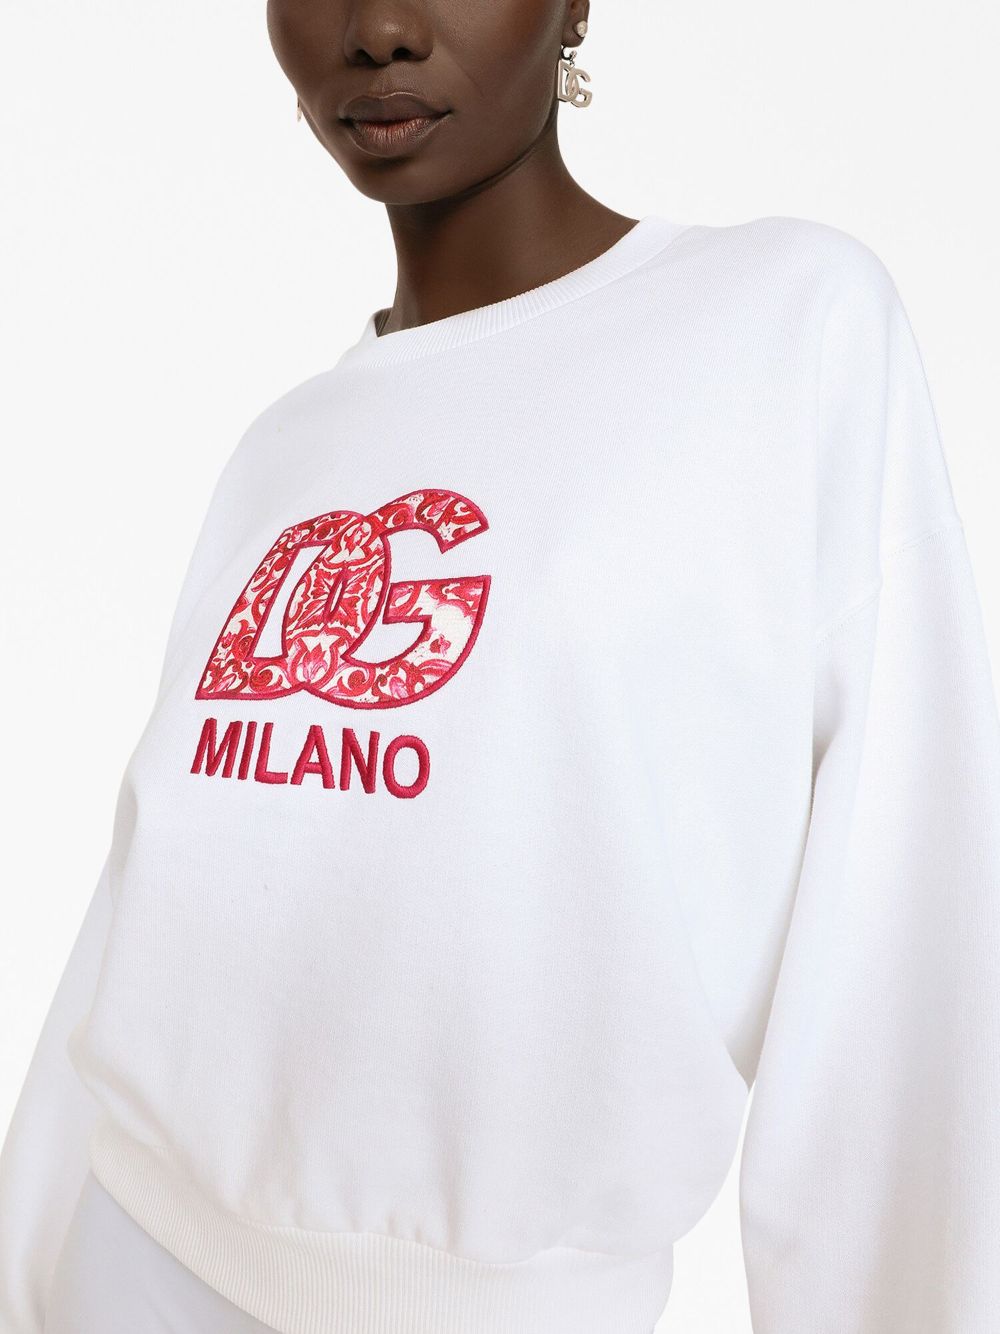 alo Double Take Pullover in White